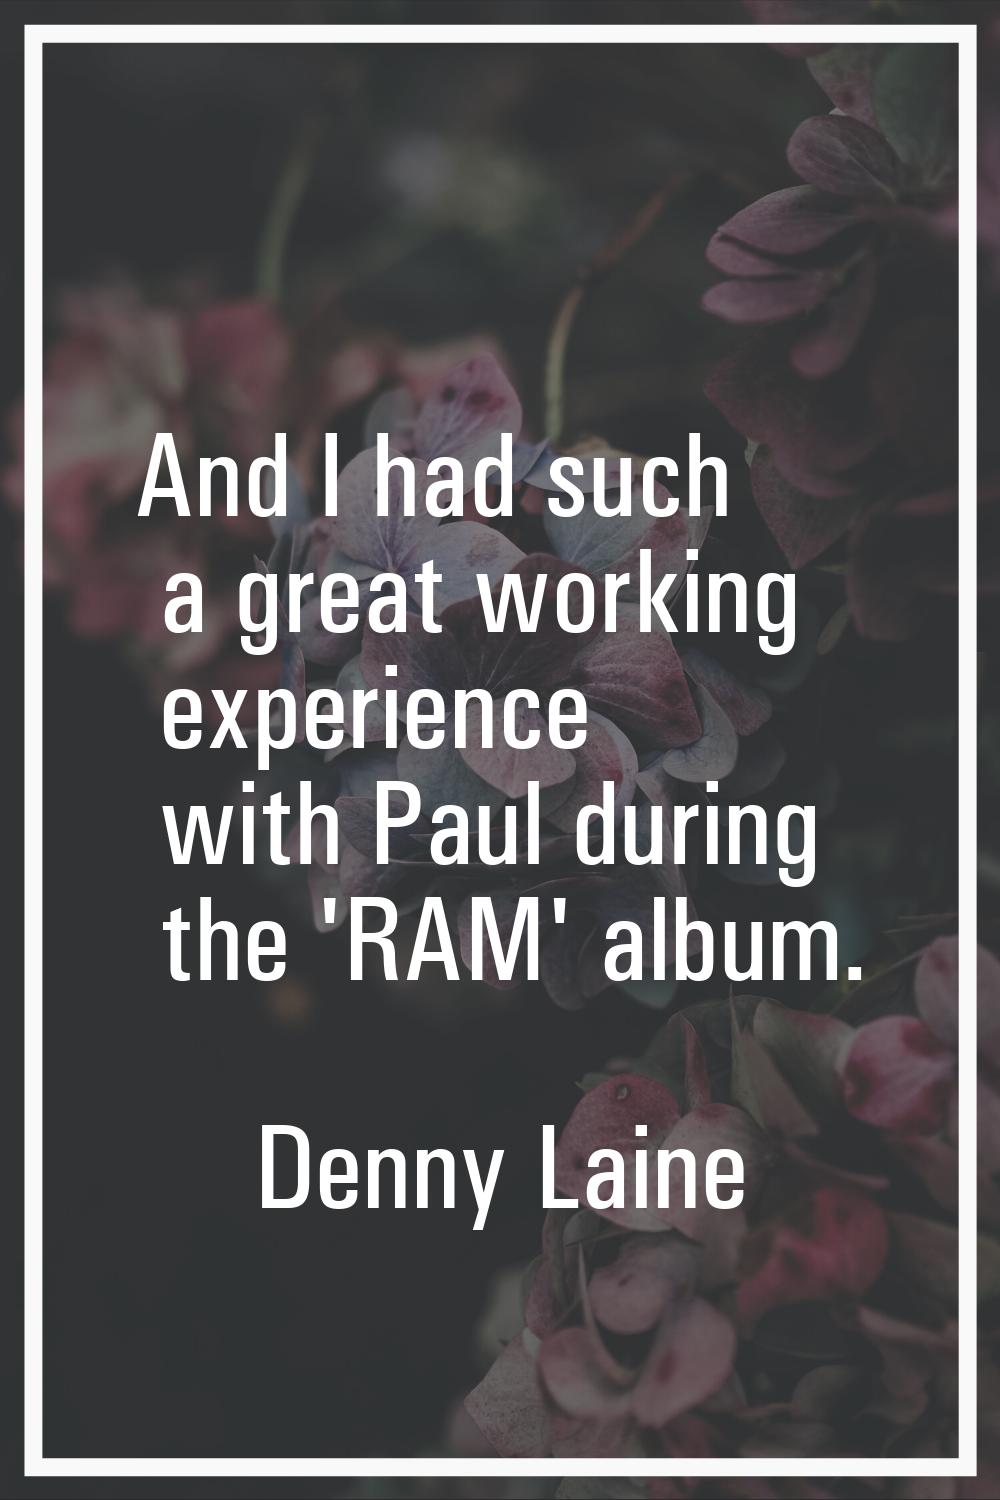 And I had such a great working experience with Paul during the 'RAM' album.